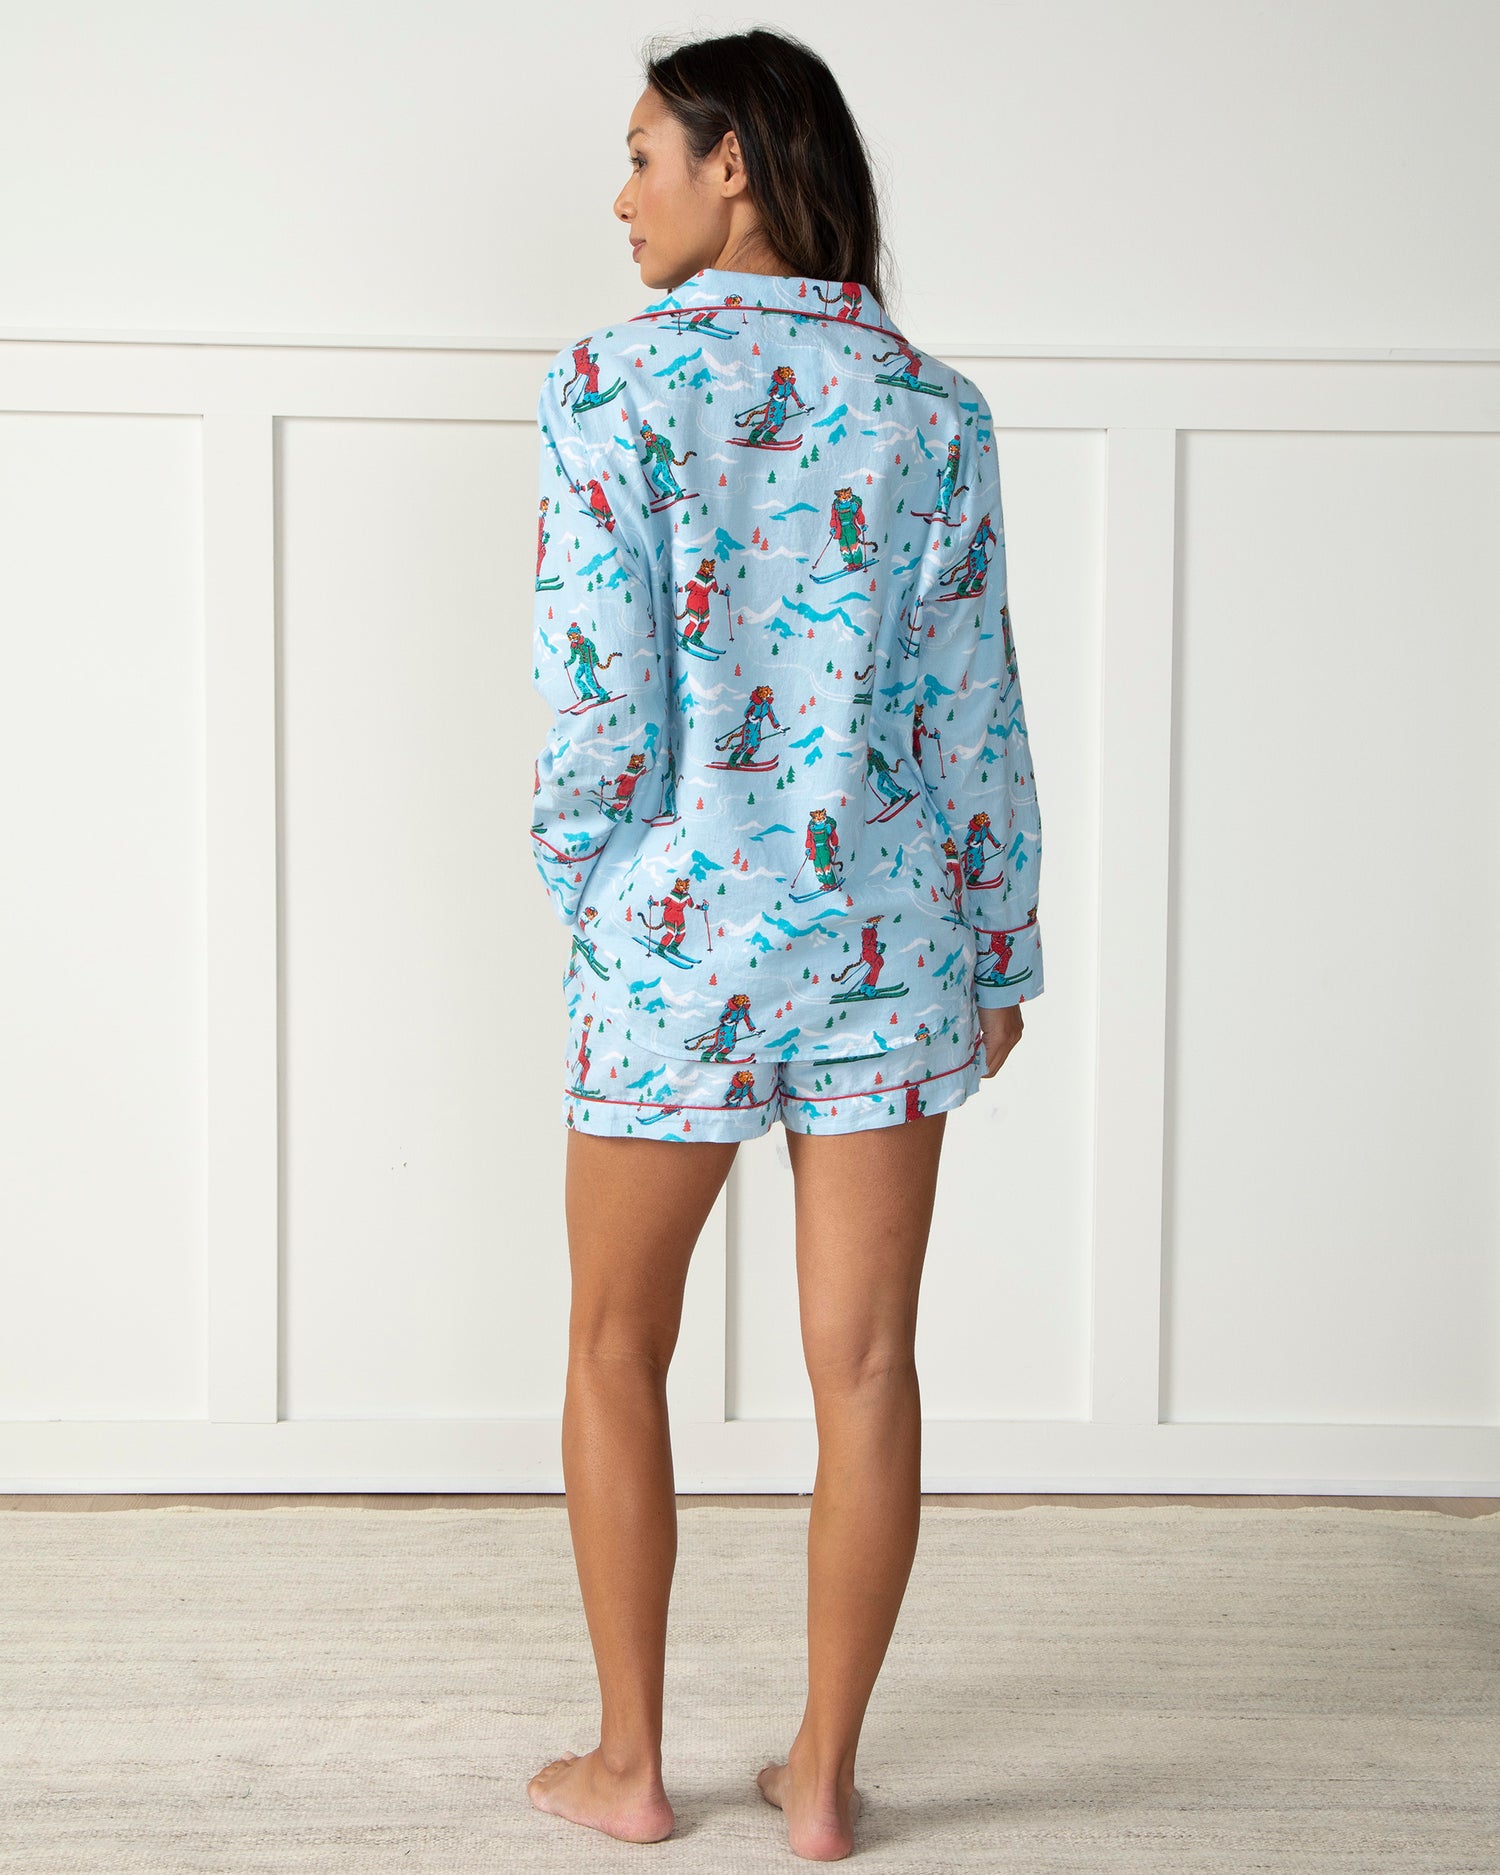 Hit the Slopes - Flannel Long Sleeve Top & Shorts Set - Frosted Lake - Printfresh